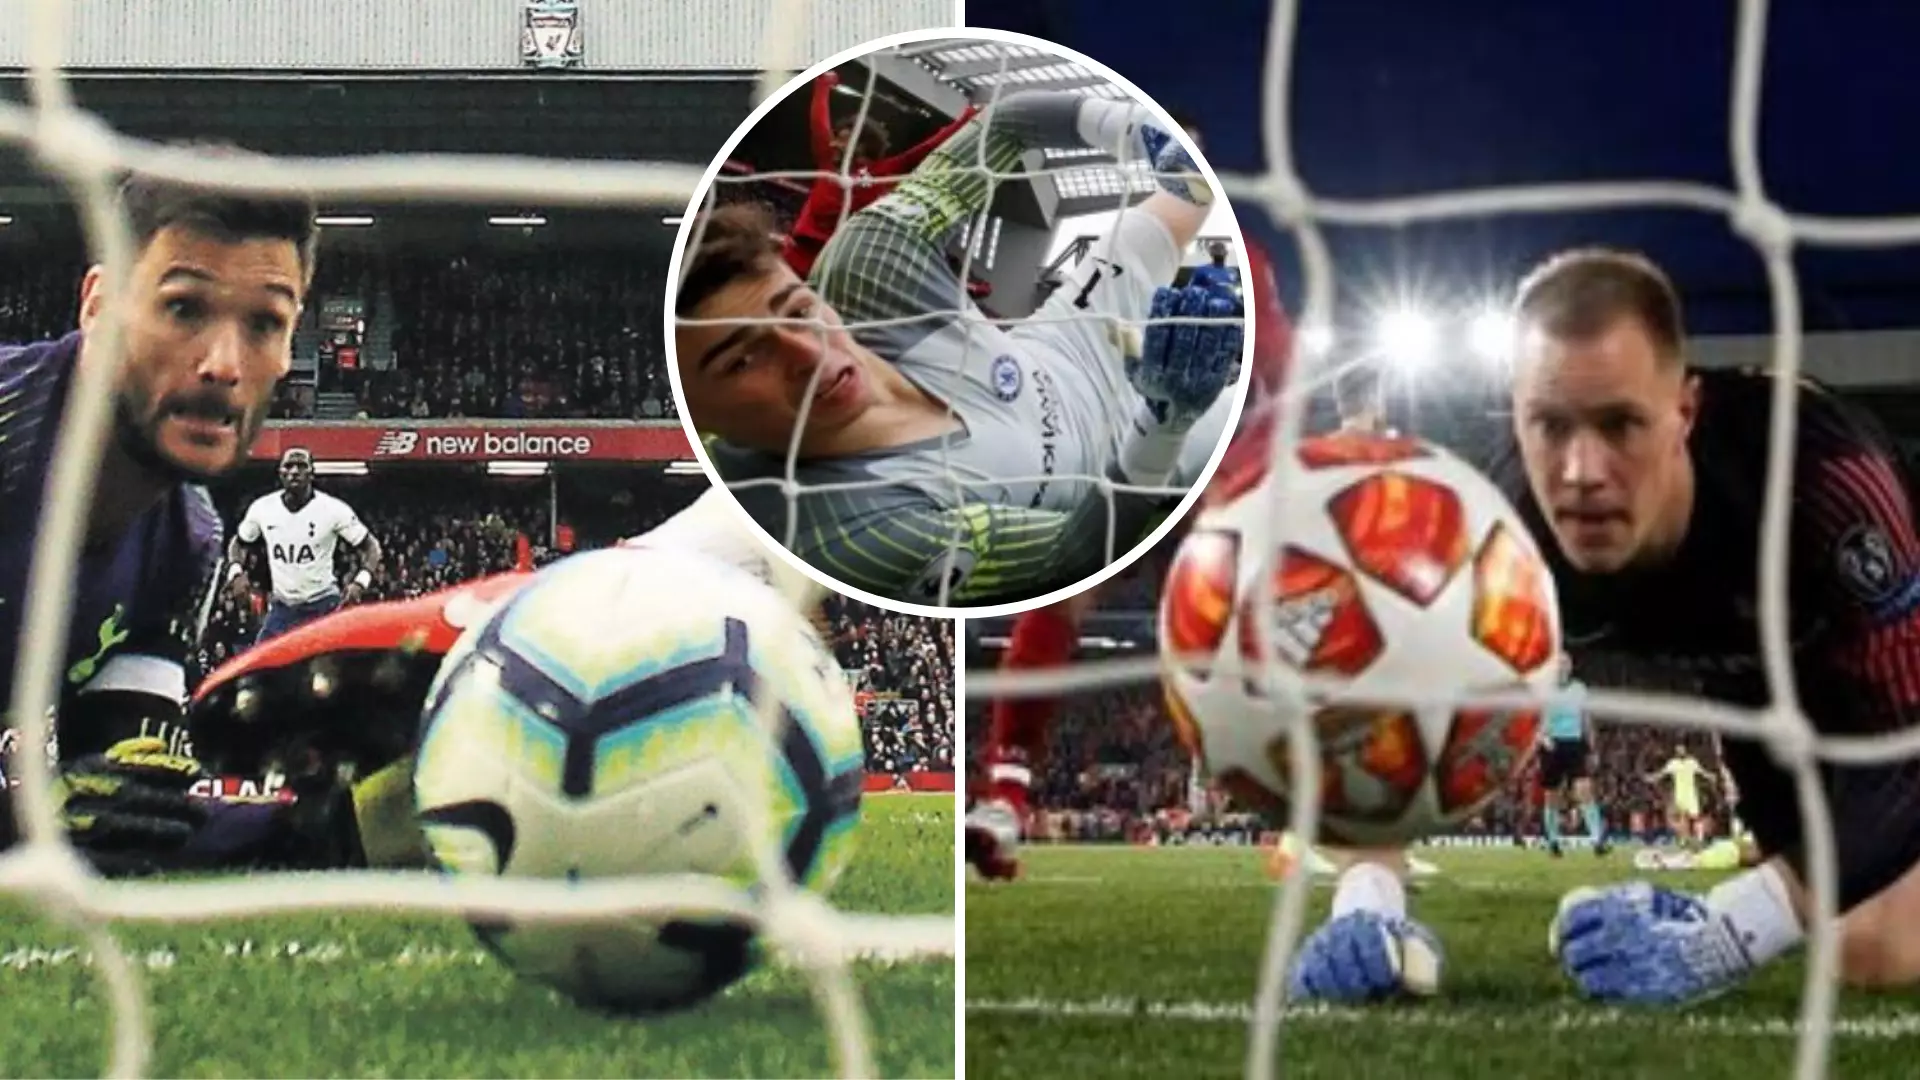 The Camera Behind The Nets At Anfield Has Produced Some Priceless Shots This Year